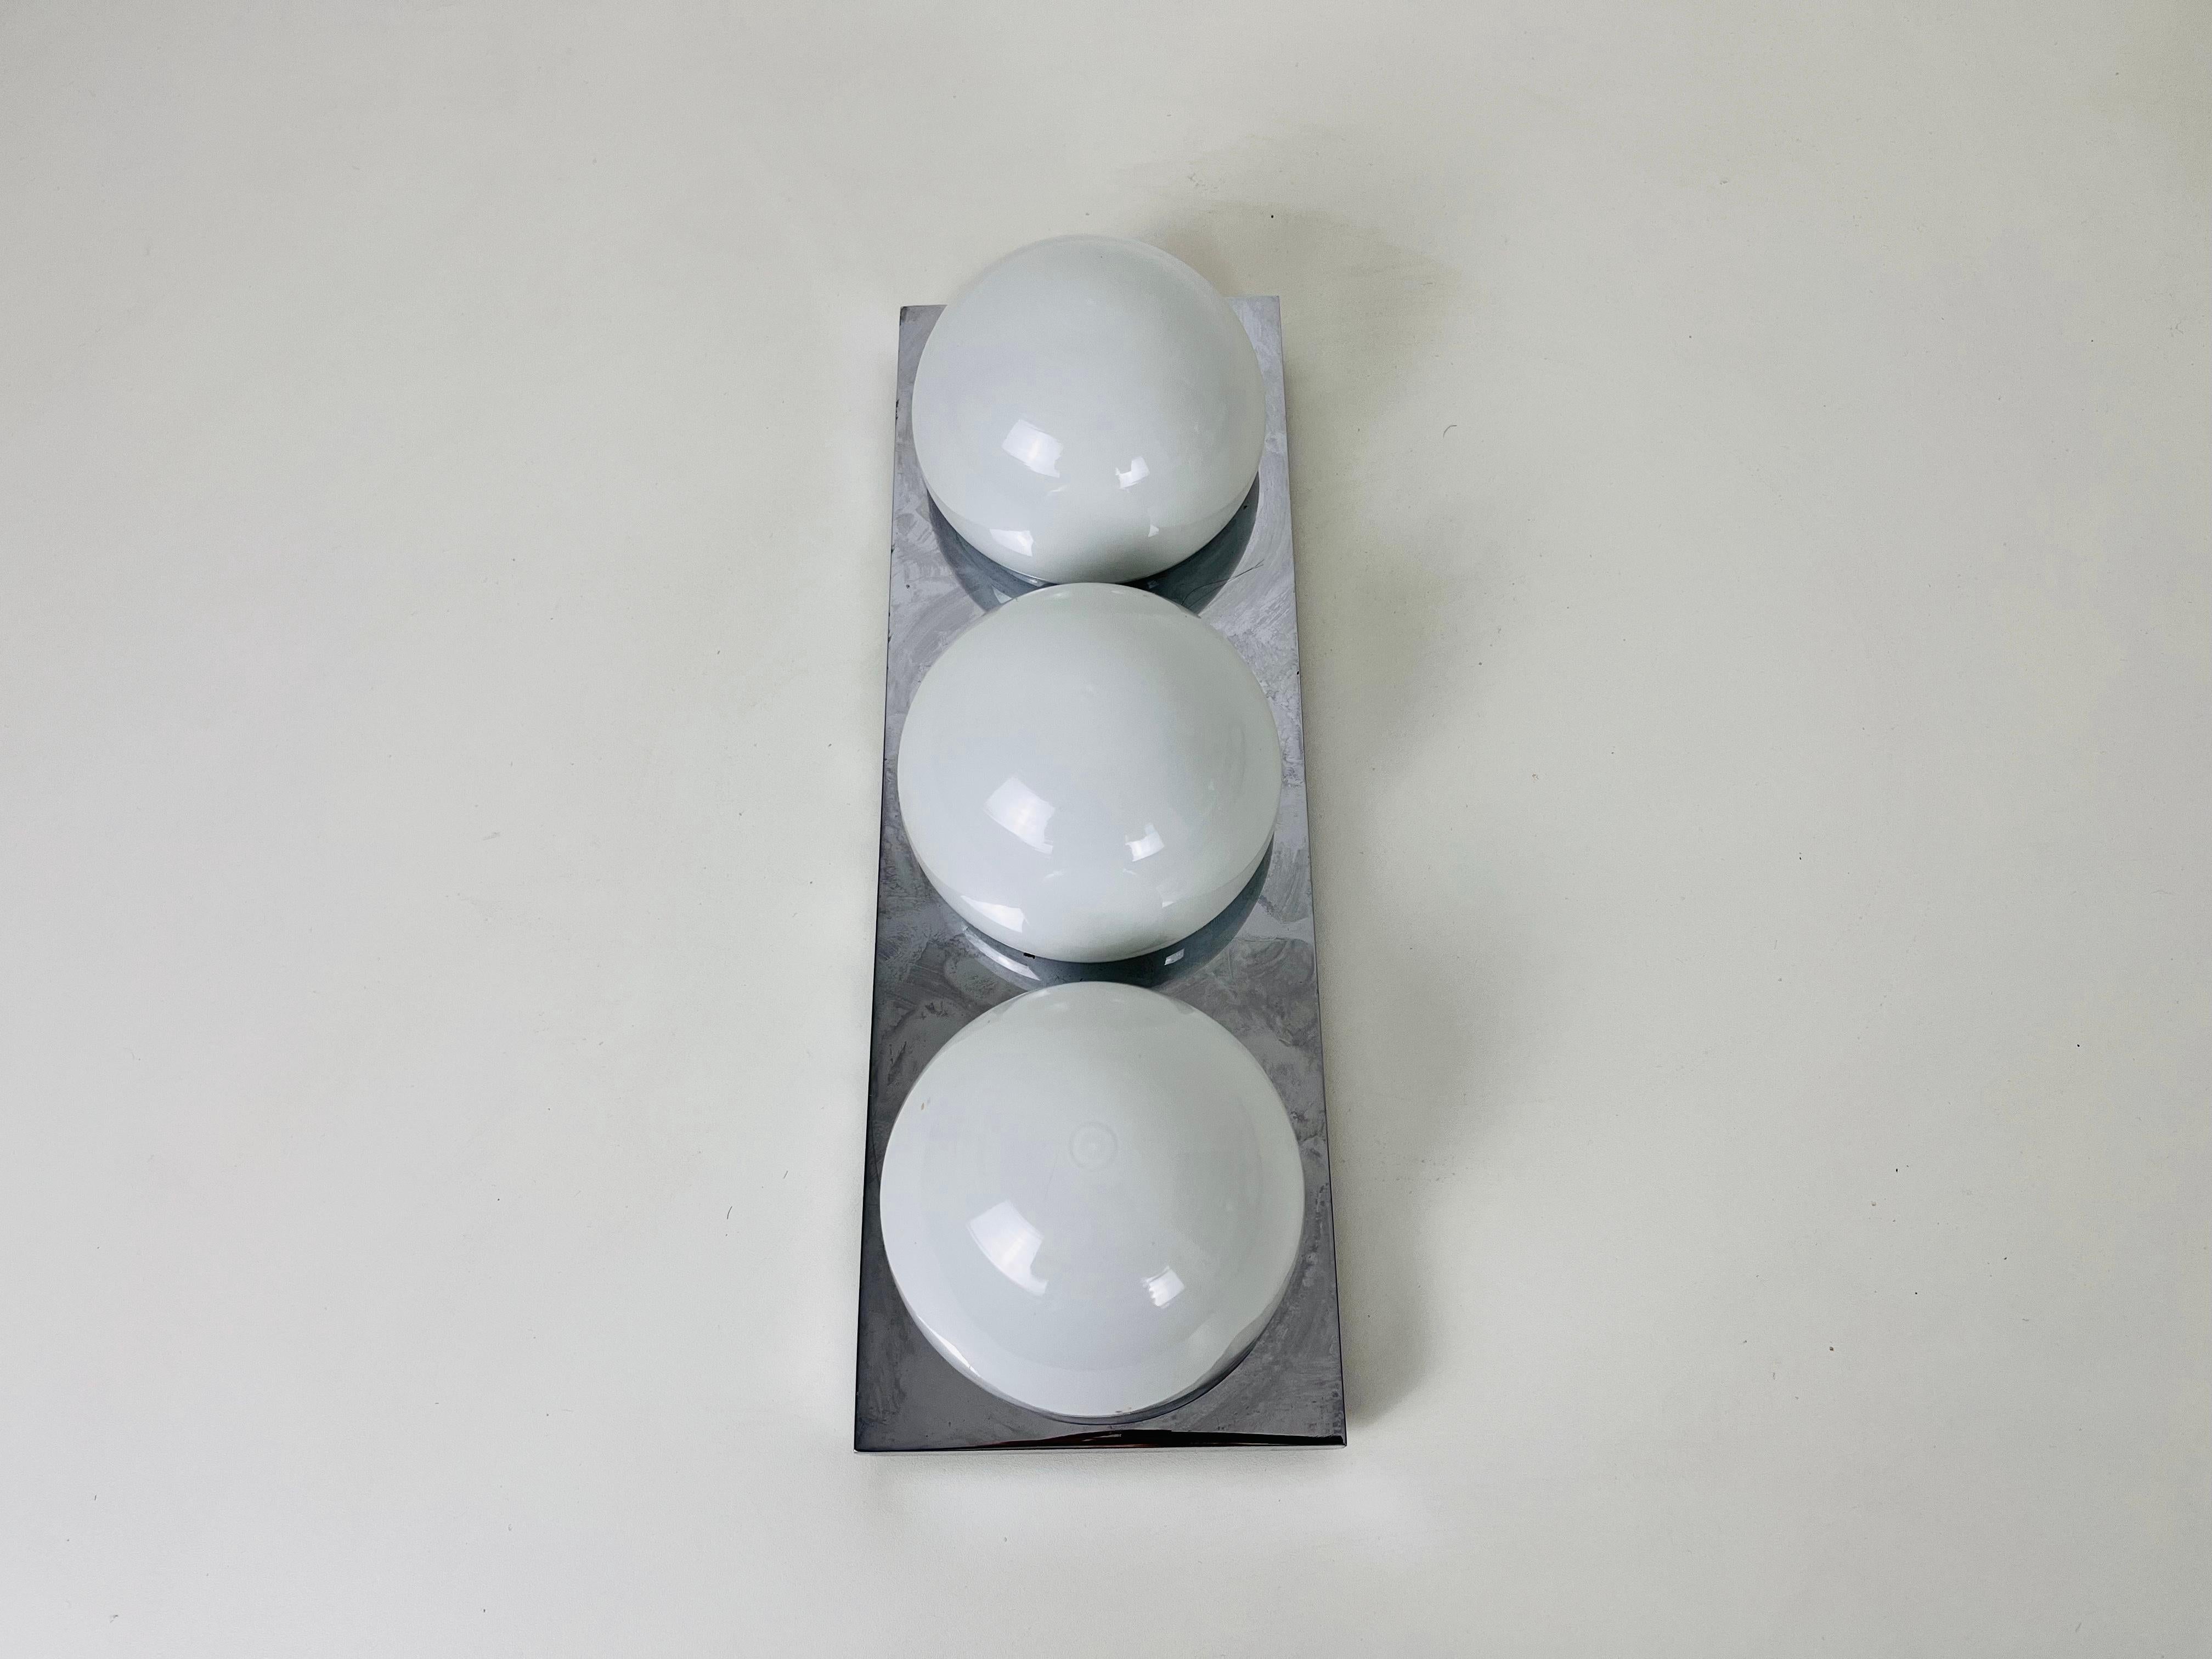 A Mid-Century Modern flush mount or wall lamp by Glashütte Limburg made in the 1960s in Germany. It is fascinating with its beautiful shape and opaline glasses. The fixture has a very nice Minimalist design.

The light requires one E27 (US E26)